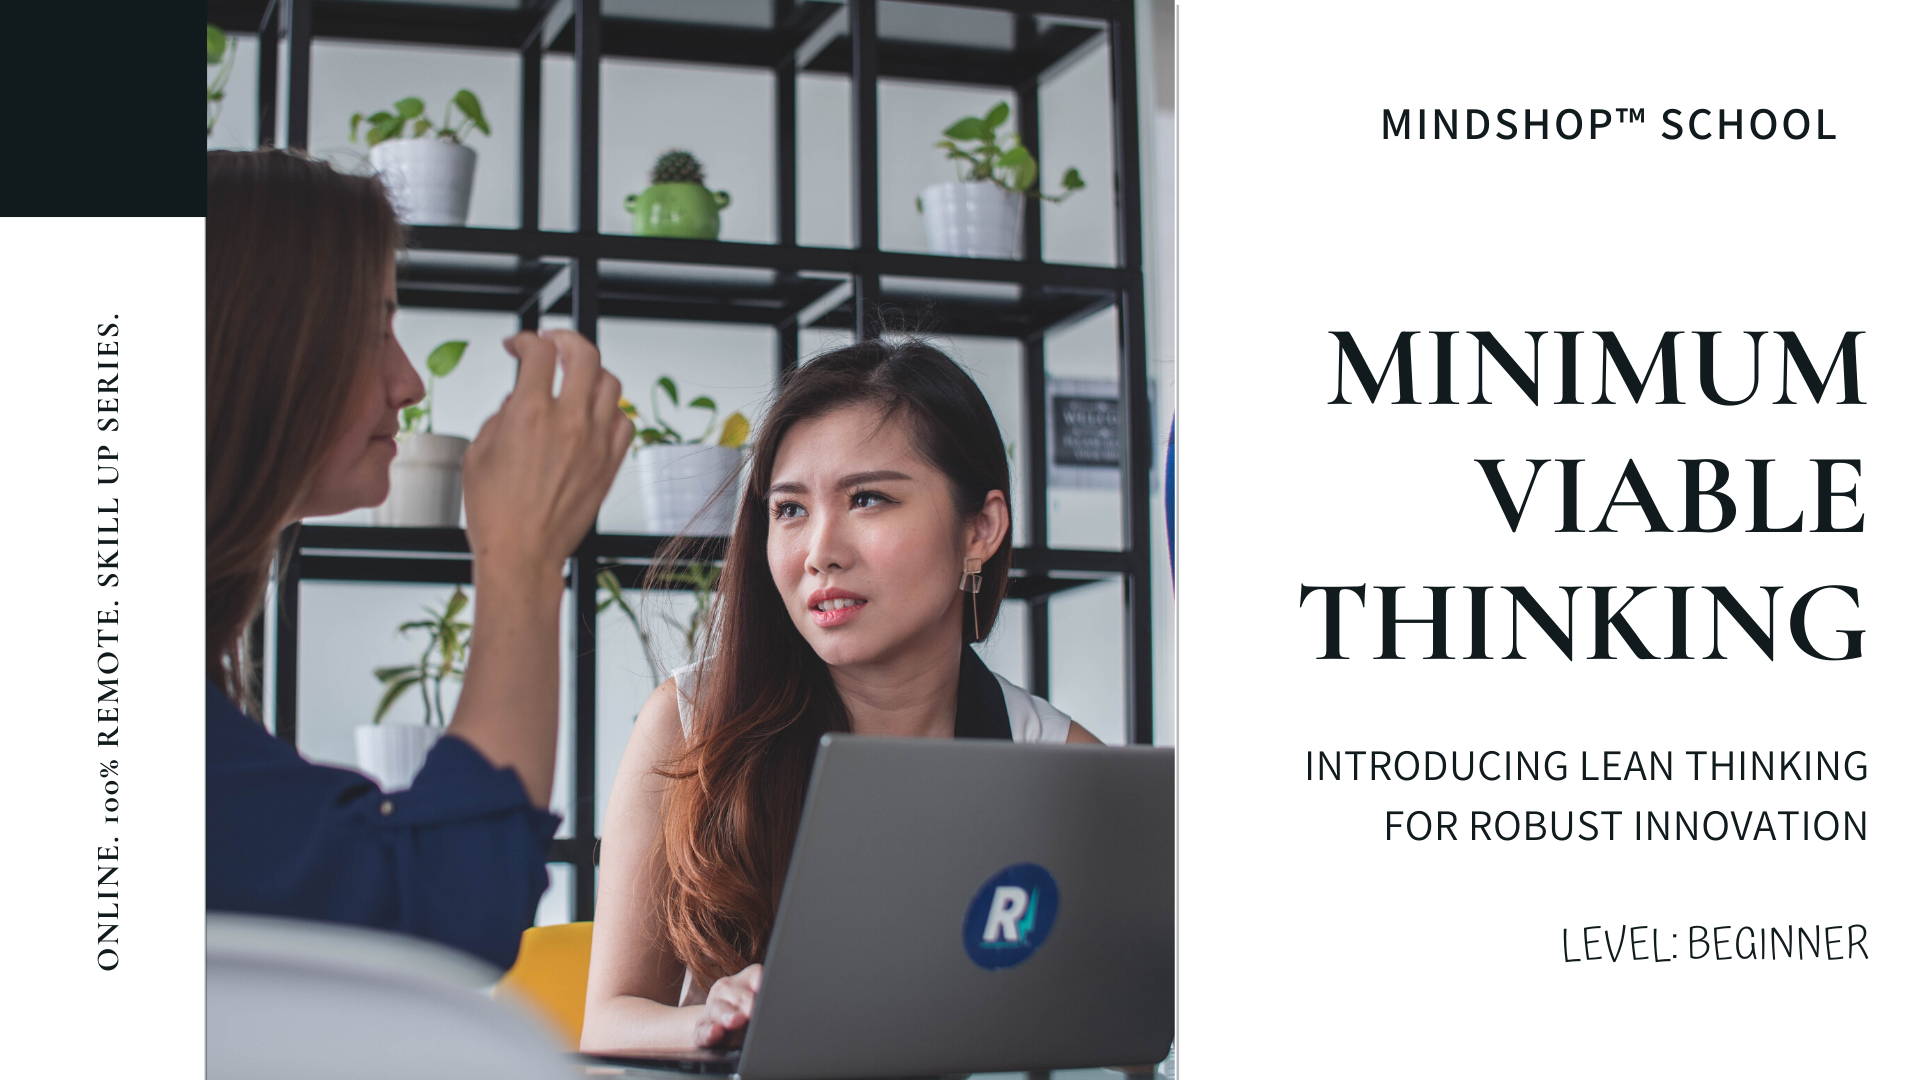 Startups: Develop Innovative Product with Minimum Viable Thinking 